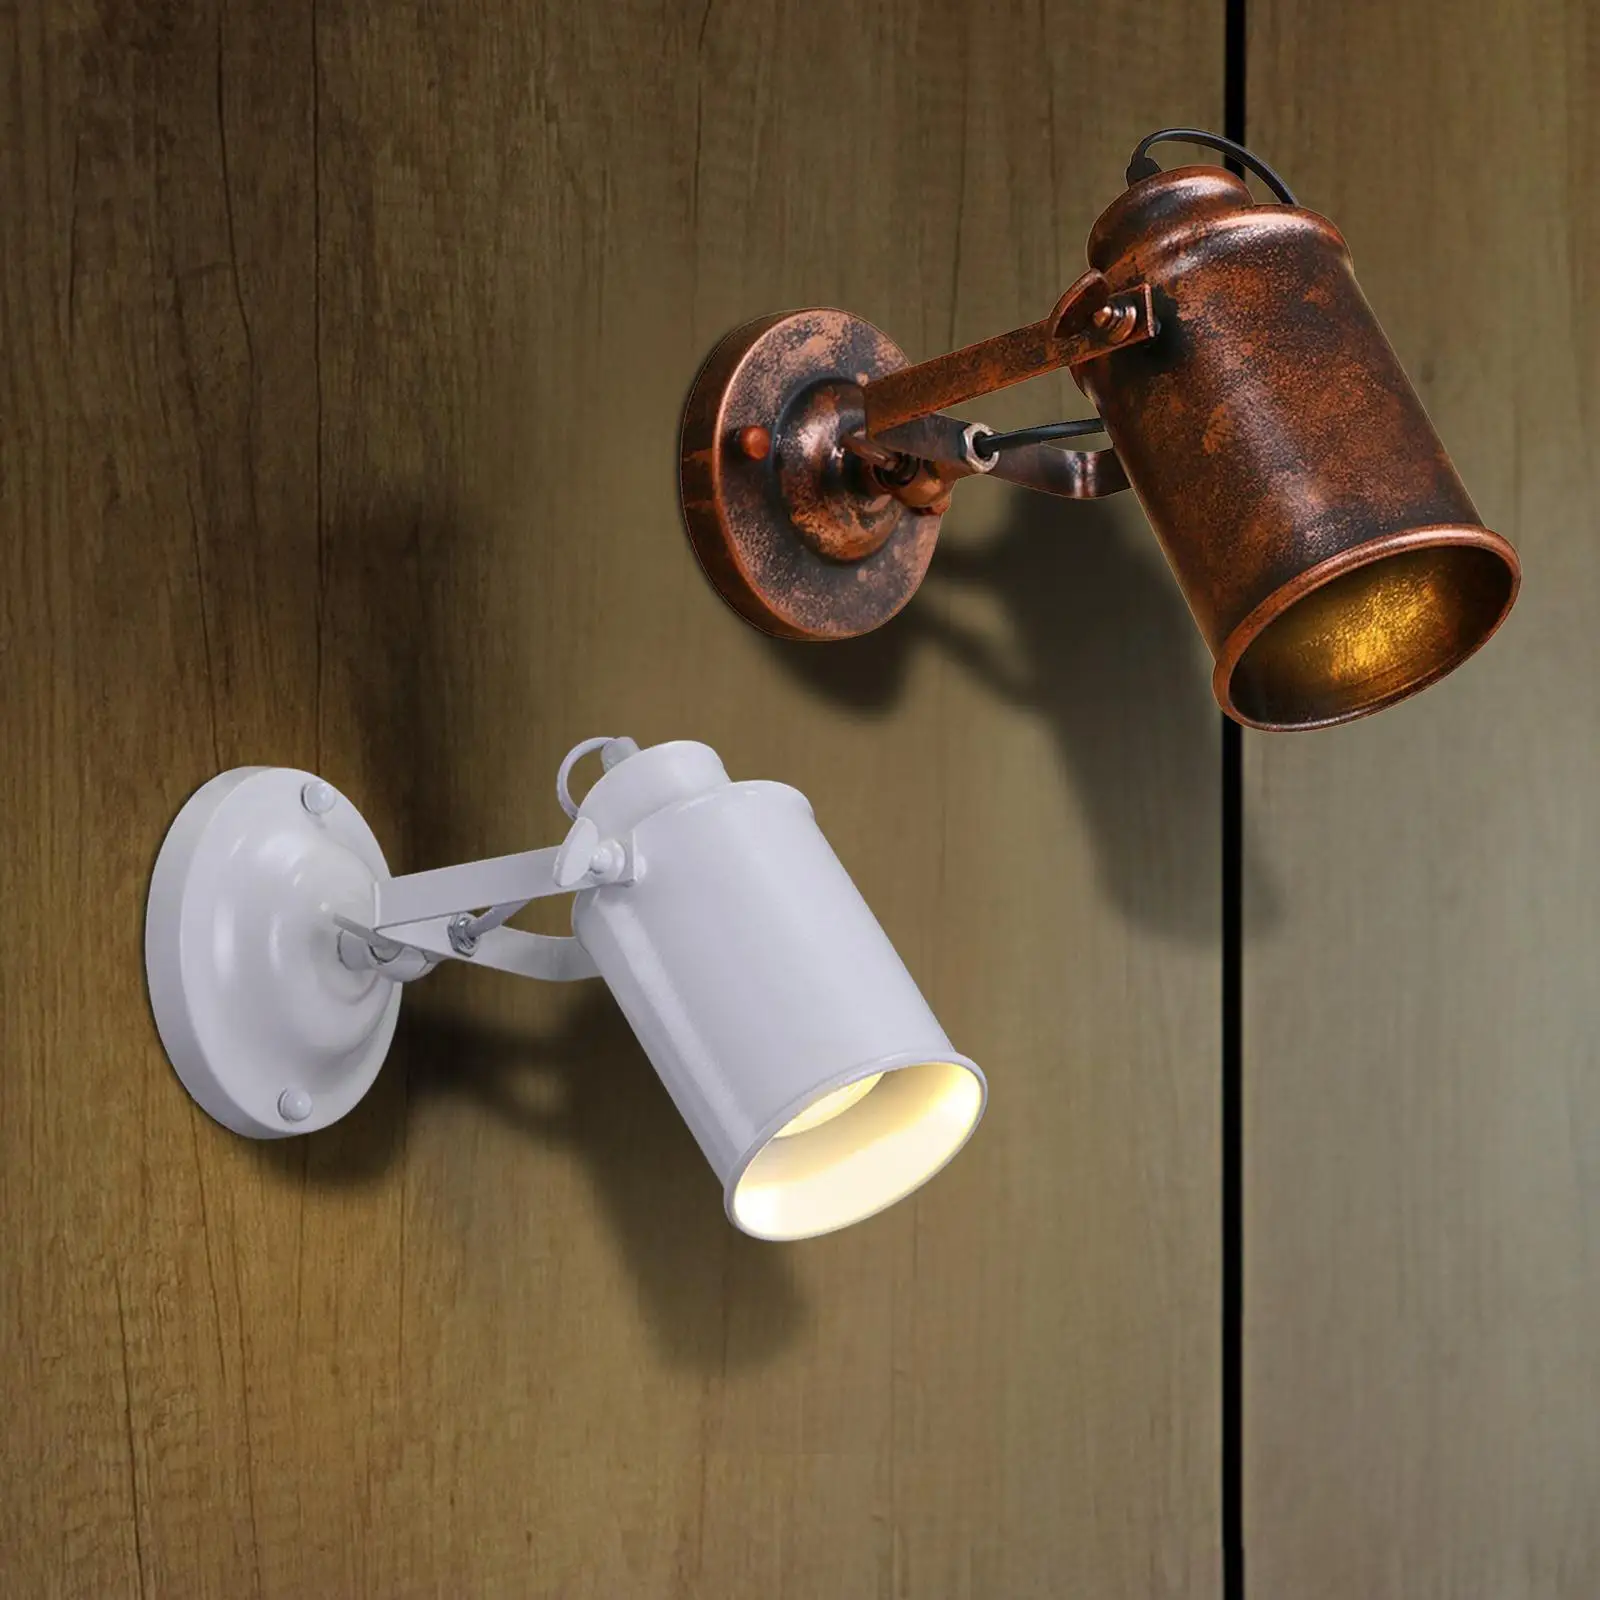 Industrial Metal Wall Sconce Wall Mounted Wall Lighting Retro Wall Lamp Downlight for Aisle Living Room Restaurant Porch Bedroom